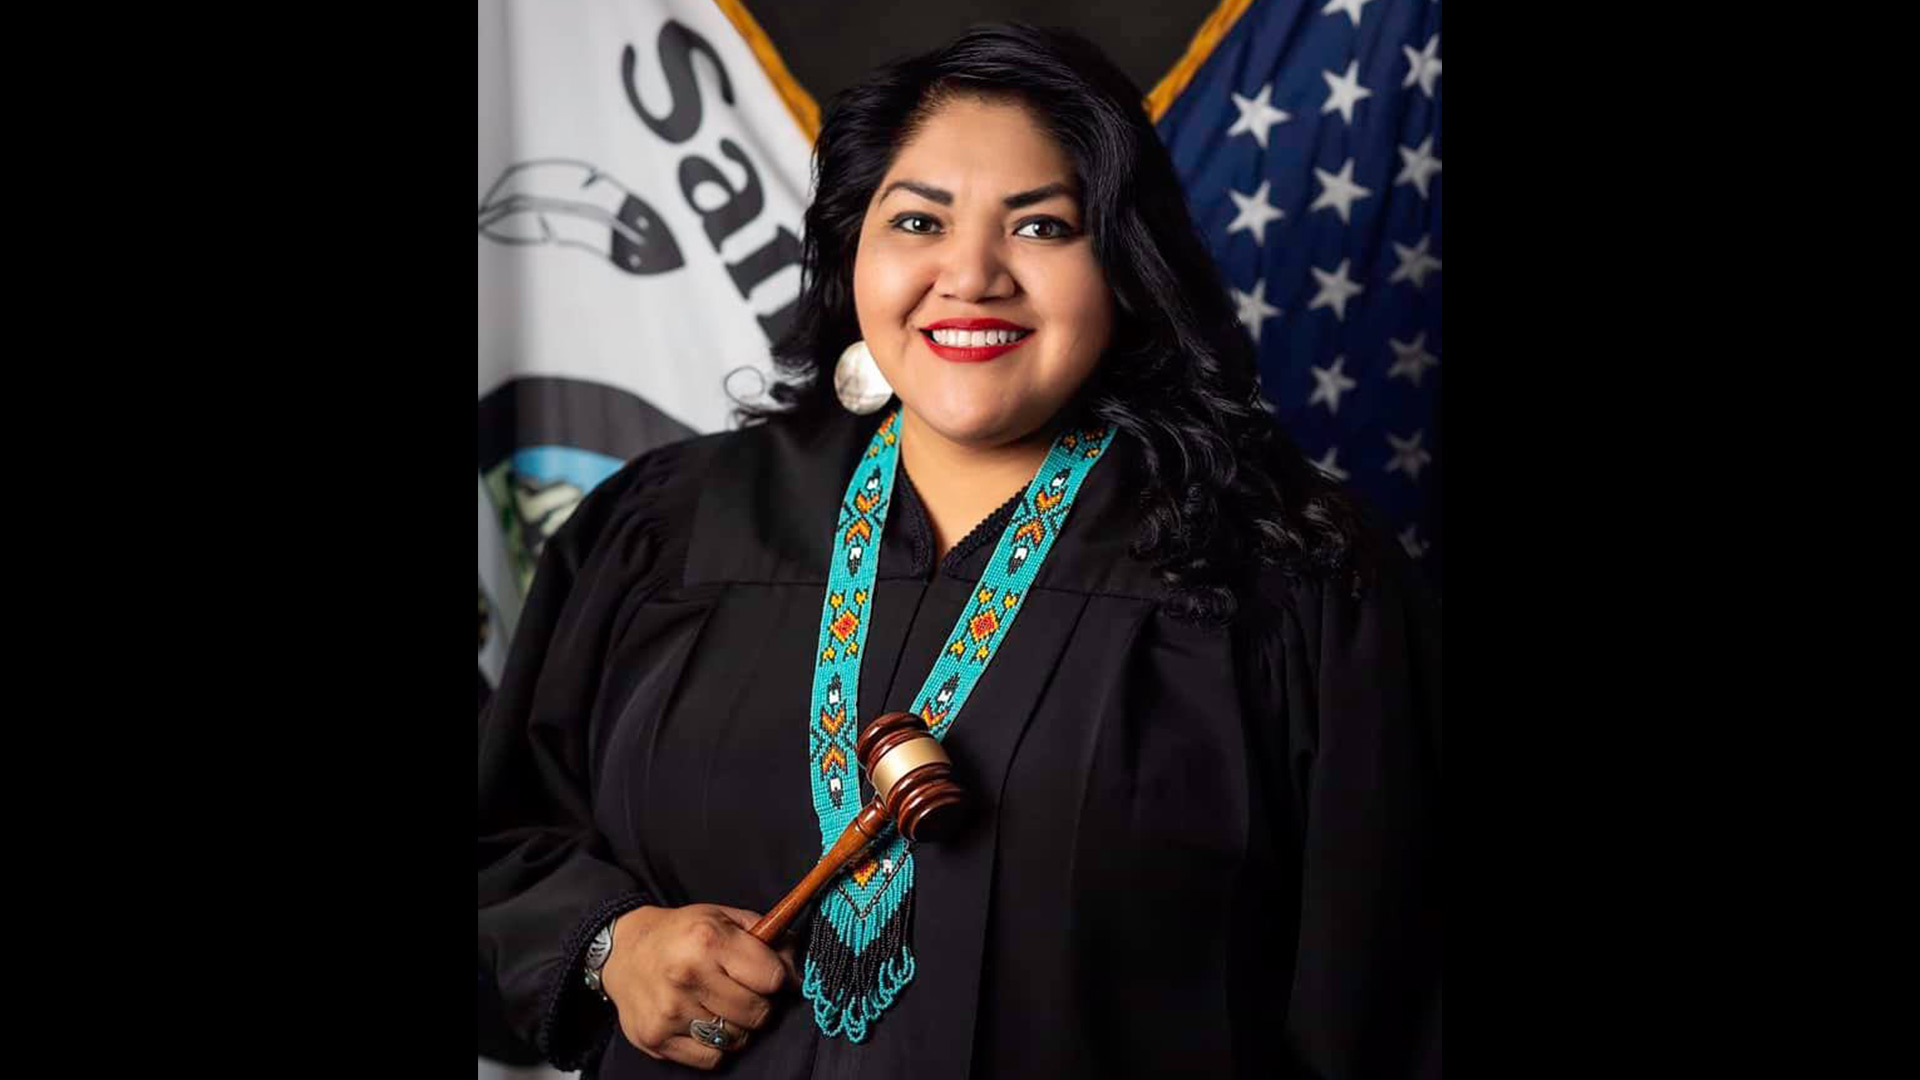 Councilwoman Claudette White, a member of the Quechan Indian Tribal Council, died Feb. 6, 2021 after contracting COVID-19. She also served on the Quechan and San Manuel Band of Mission Indians tribal courts. 
